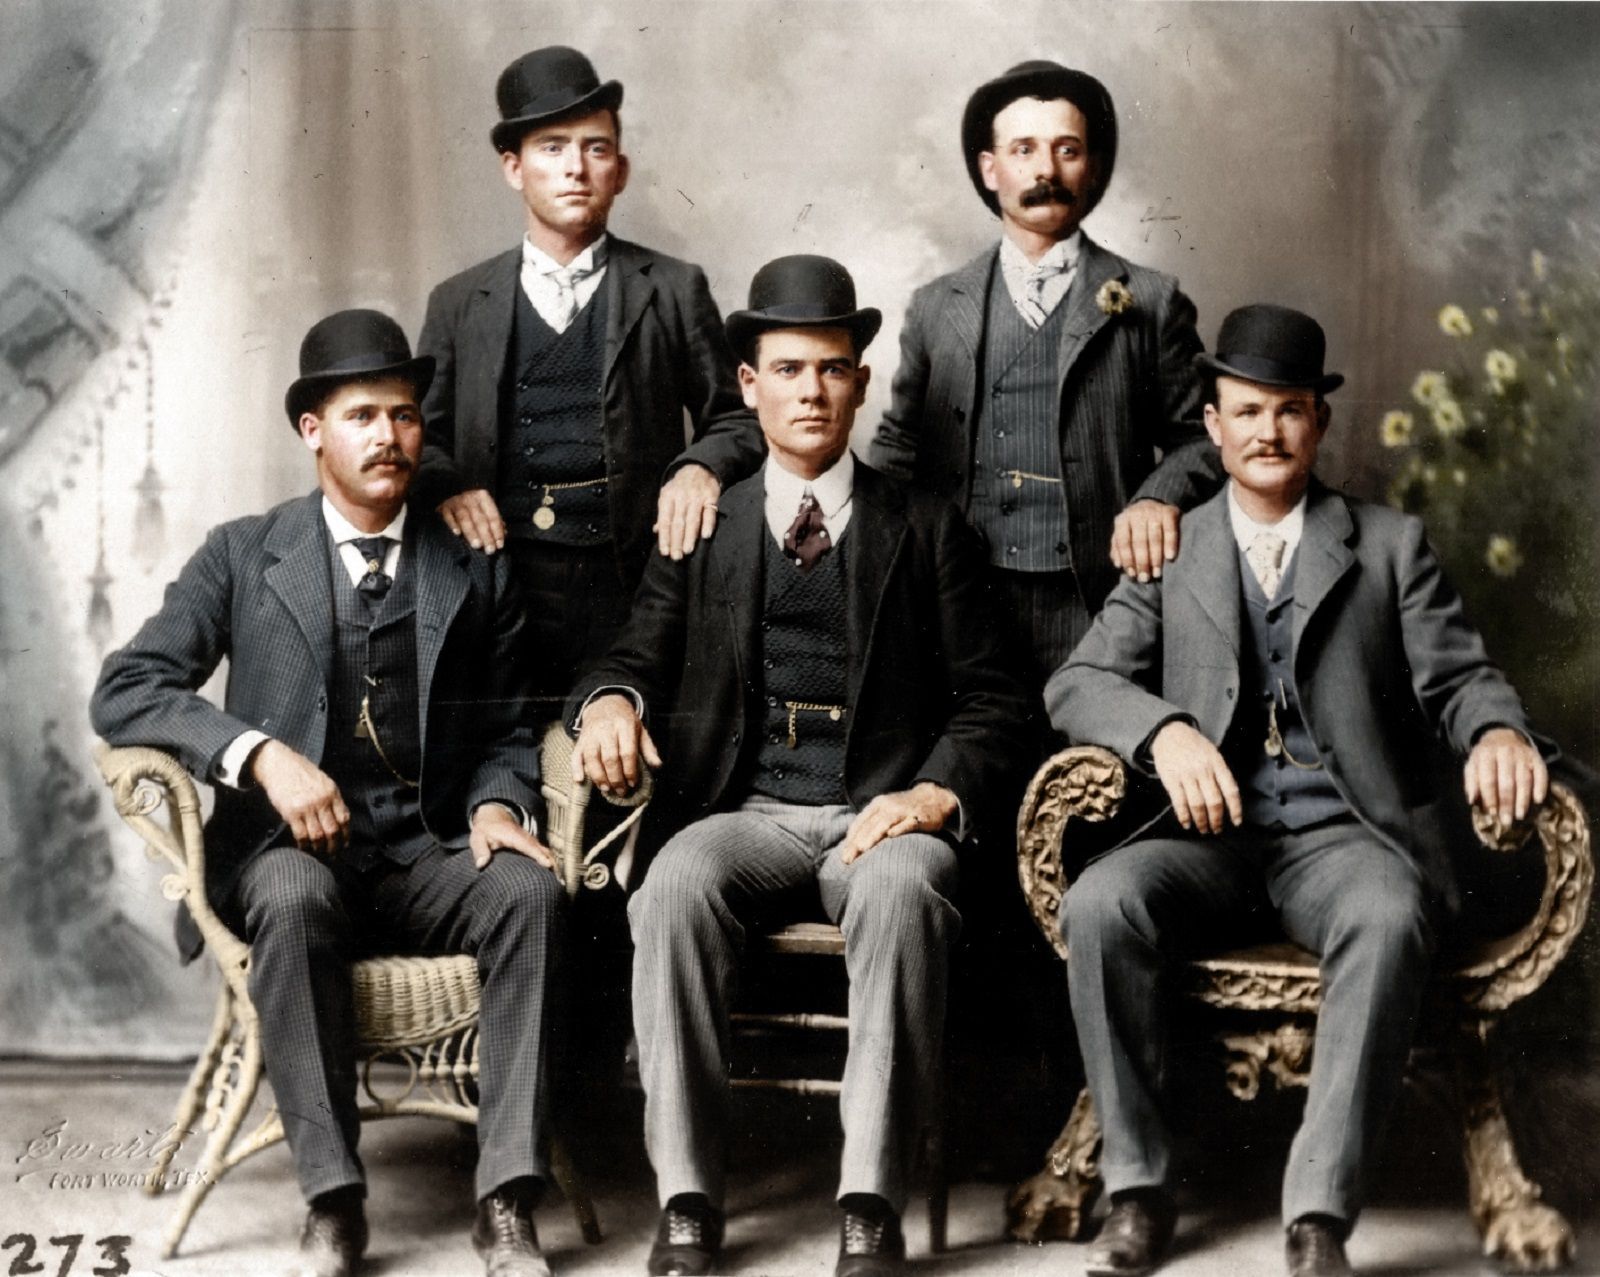 Colourised photos from history image 84